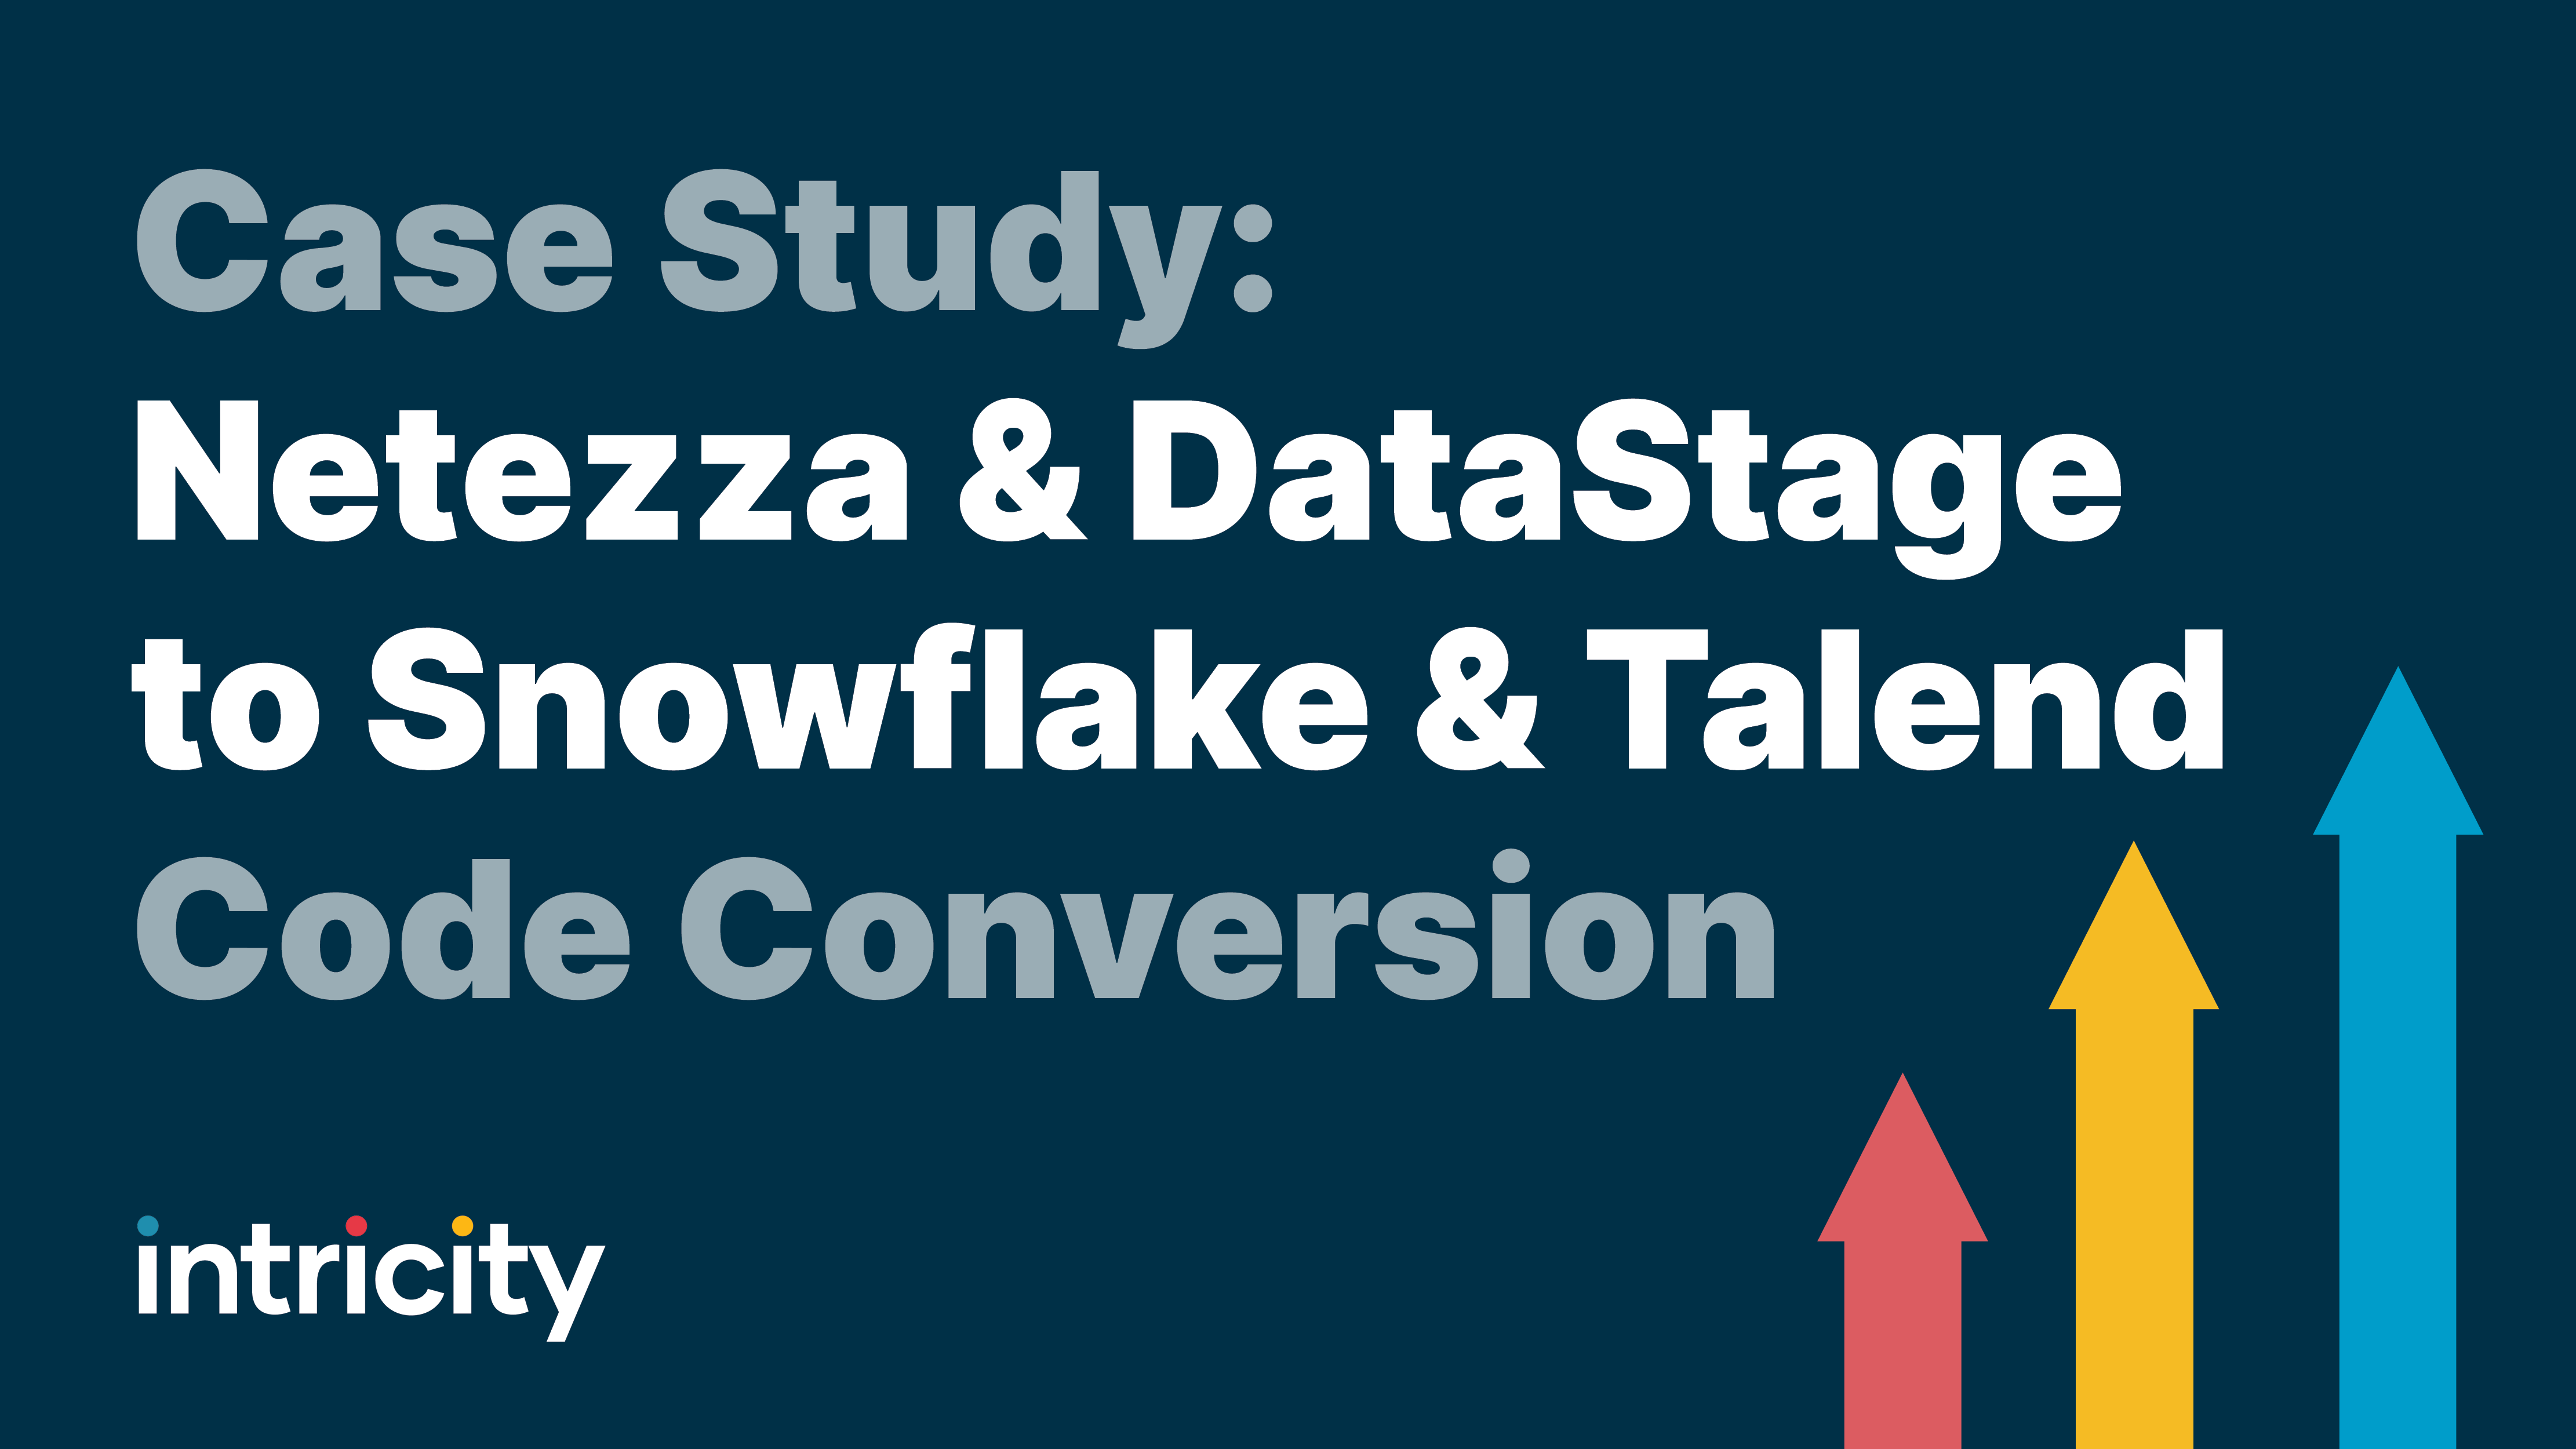 case-study-netezza-datastage-to-snowflake-talend-code-conversion